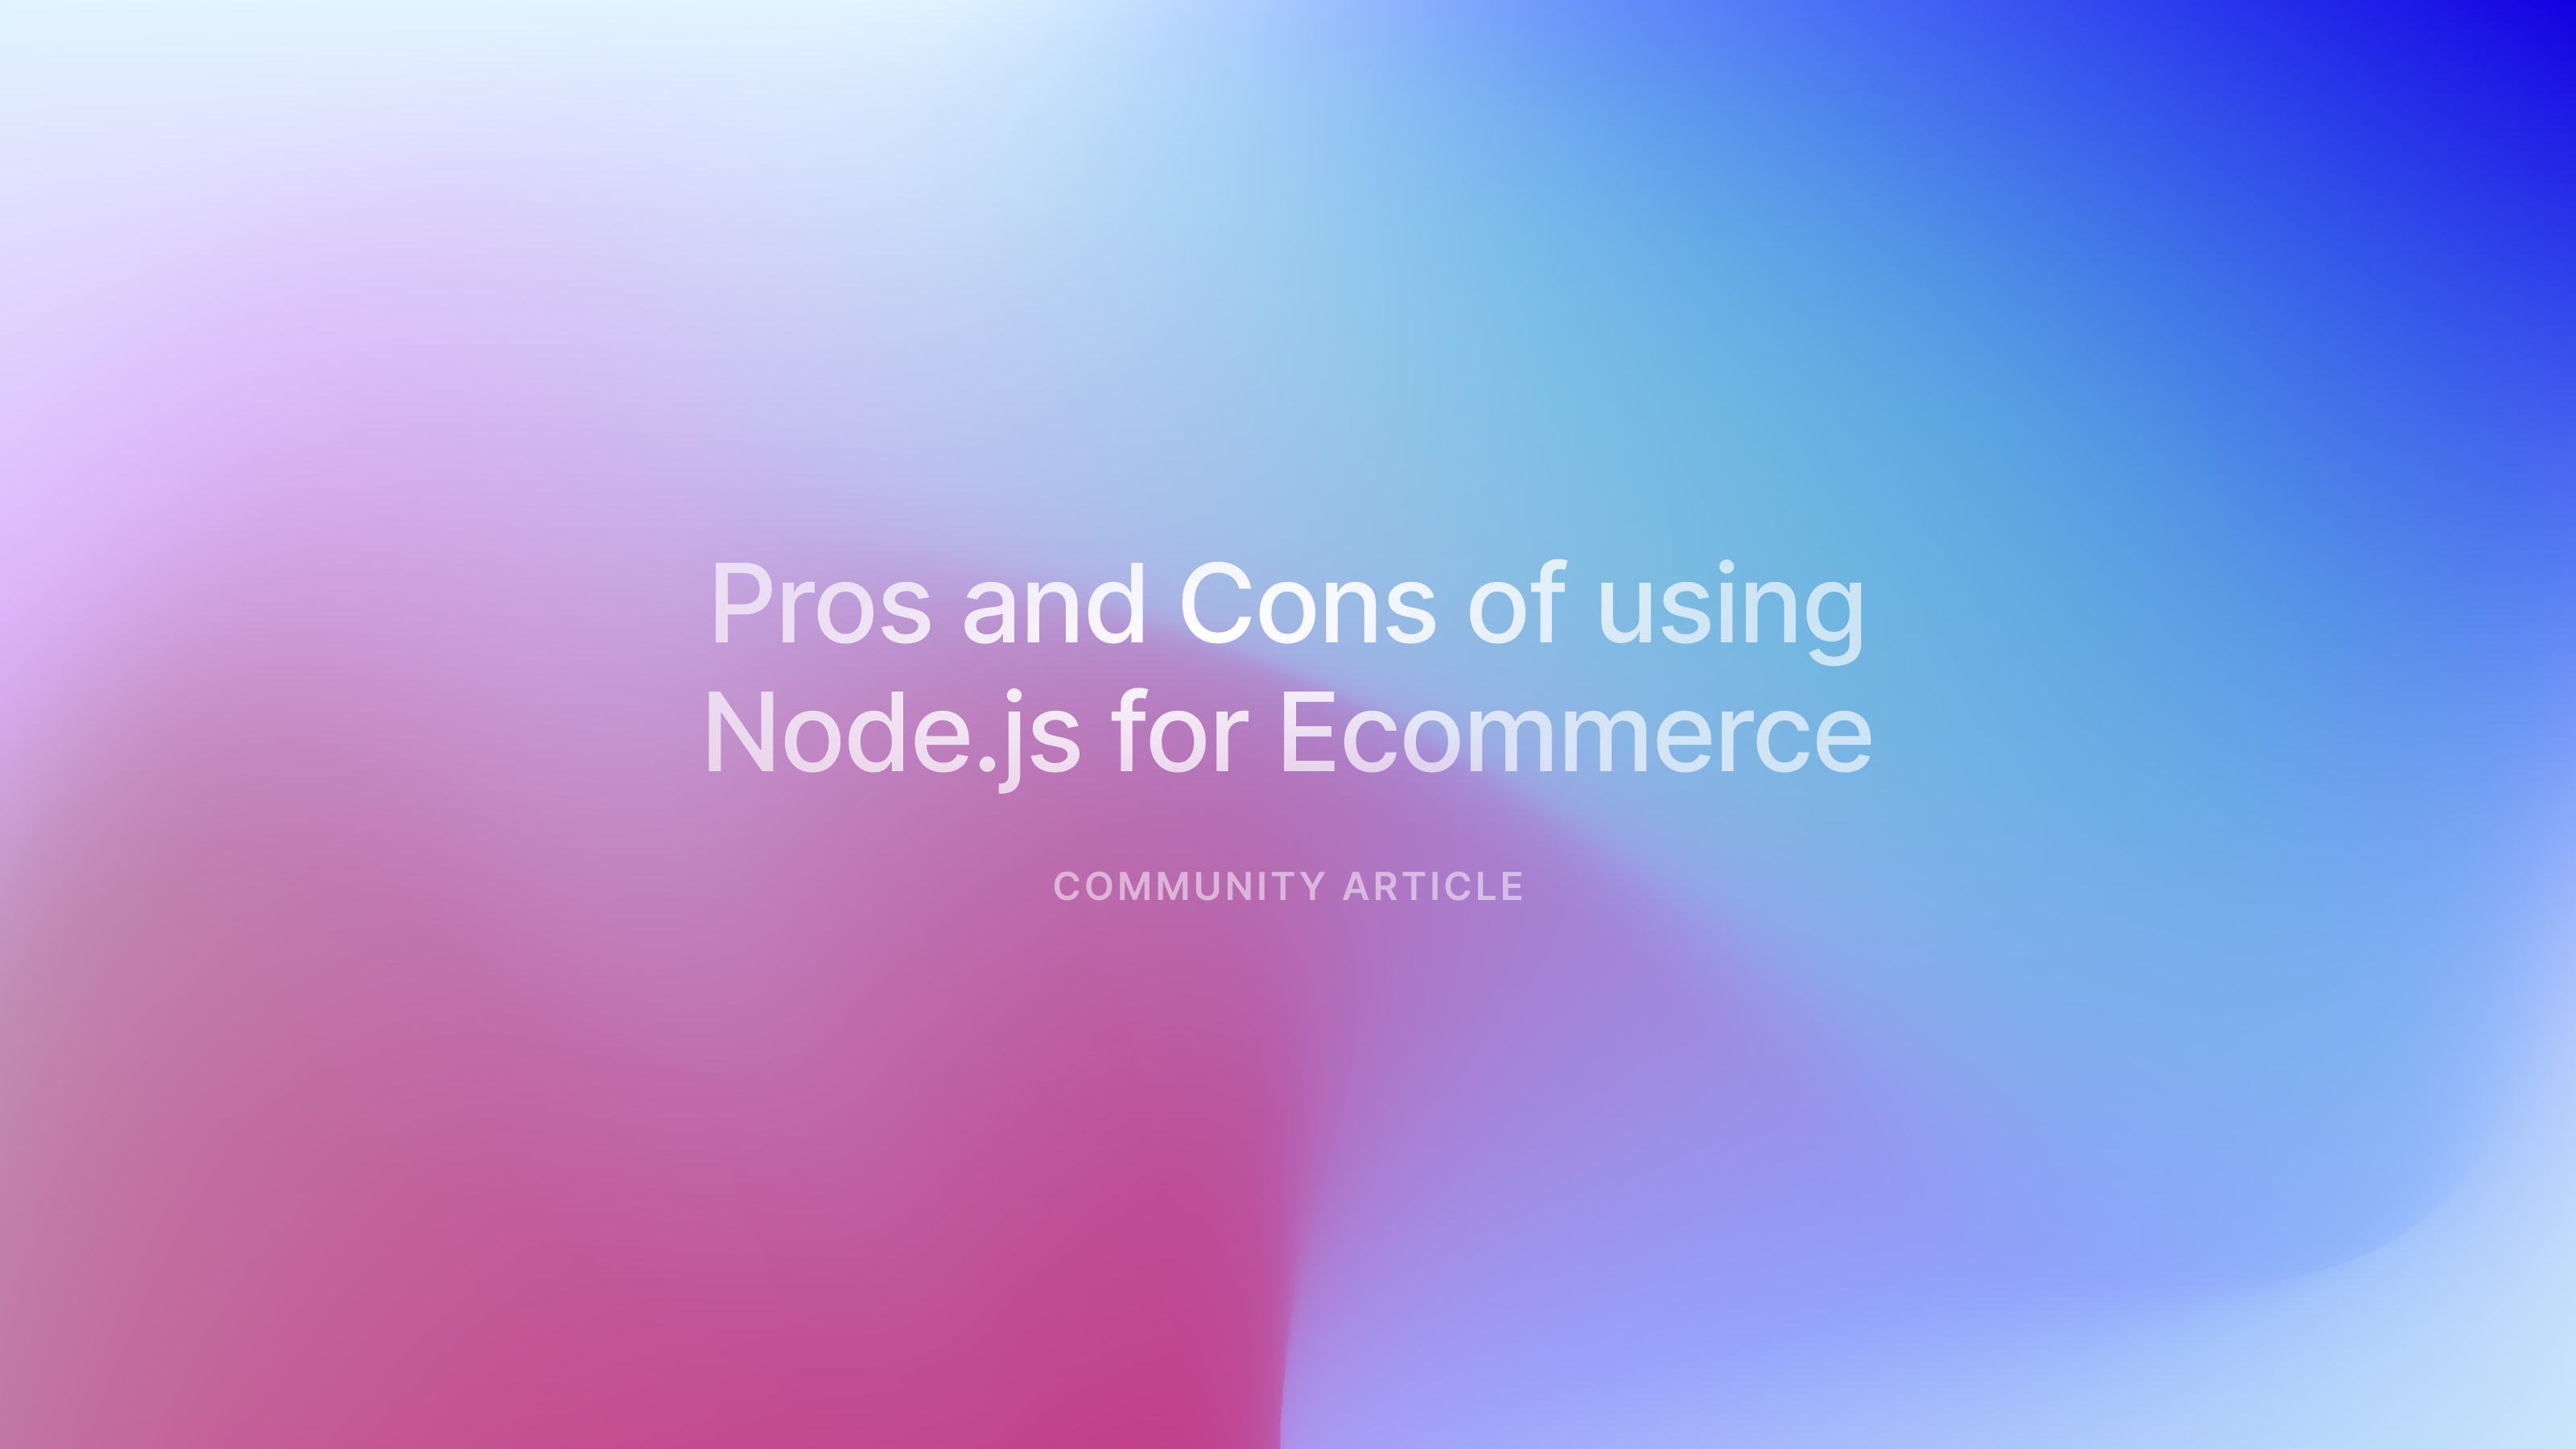 Pros and Cons of using Node.js for Ecommerce